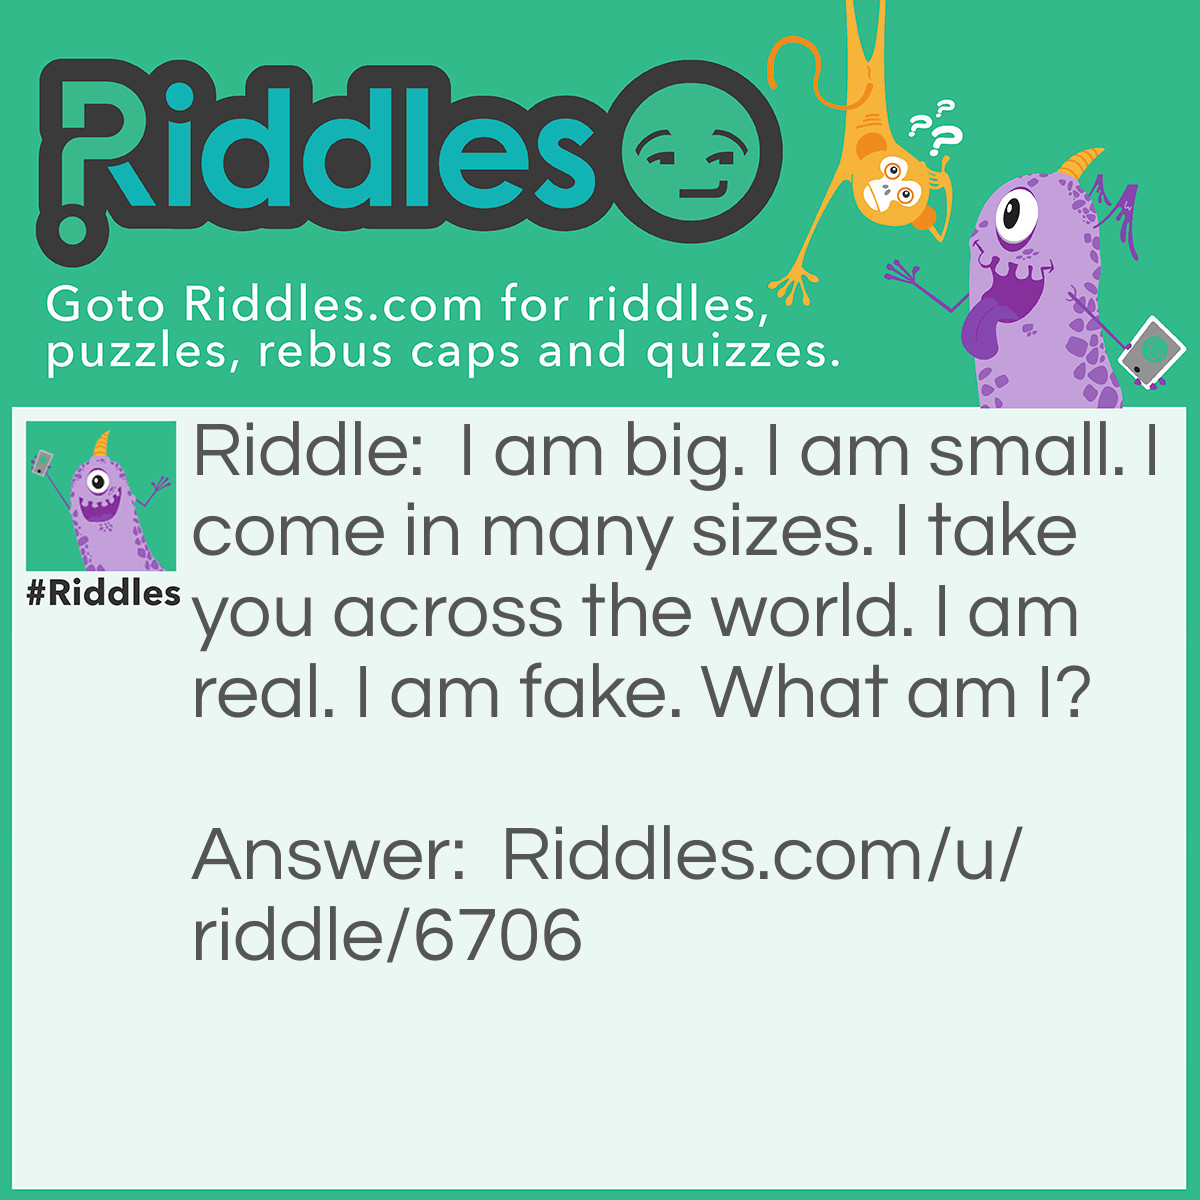 Riddle: I am big. I am small. I come in many sizes. I take you across the world. I am real. I am fake. What am I? Answer: A book!